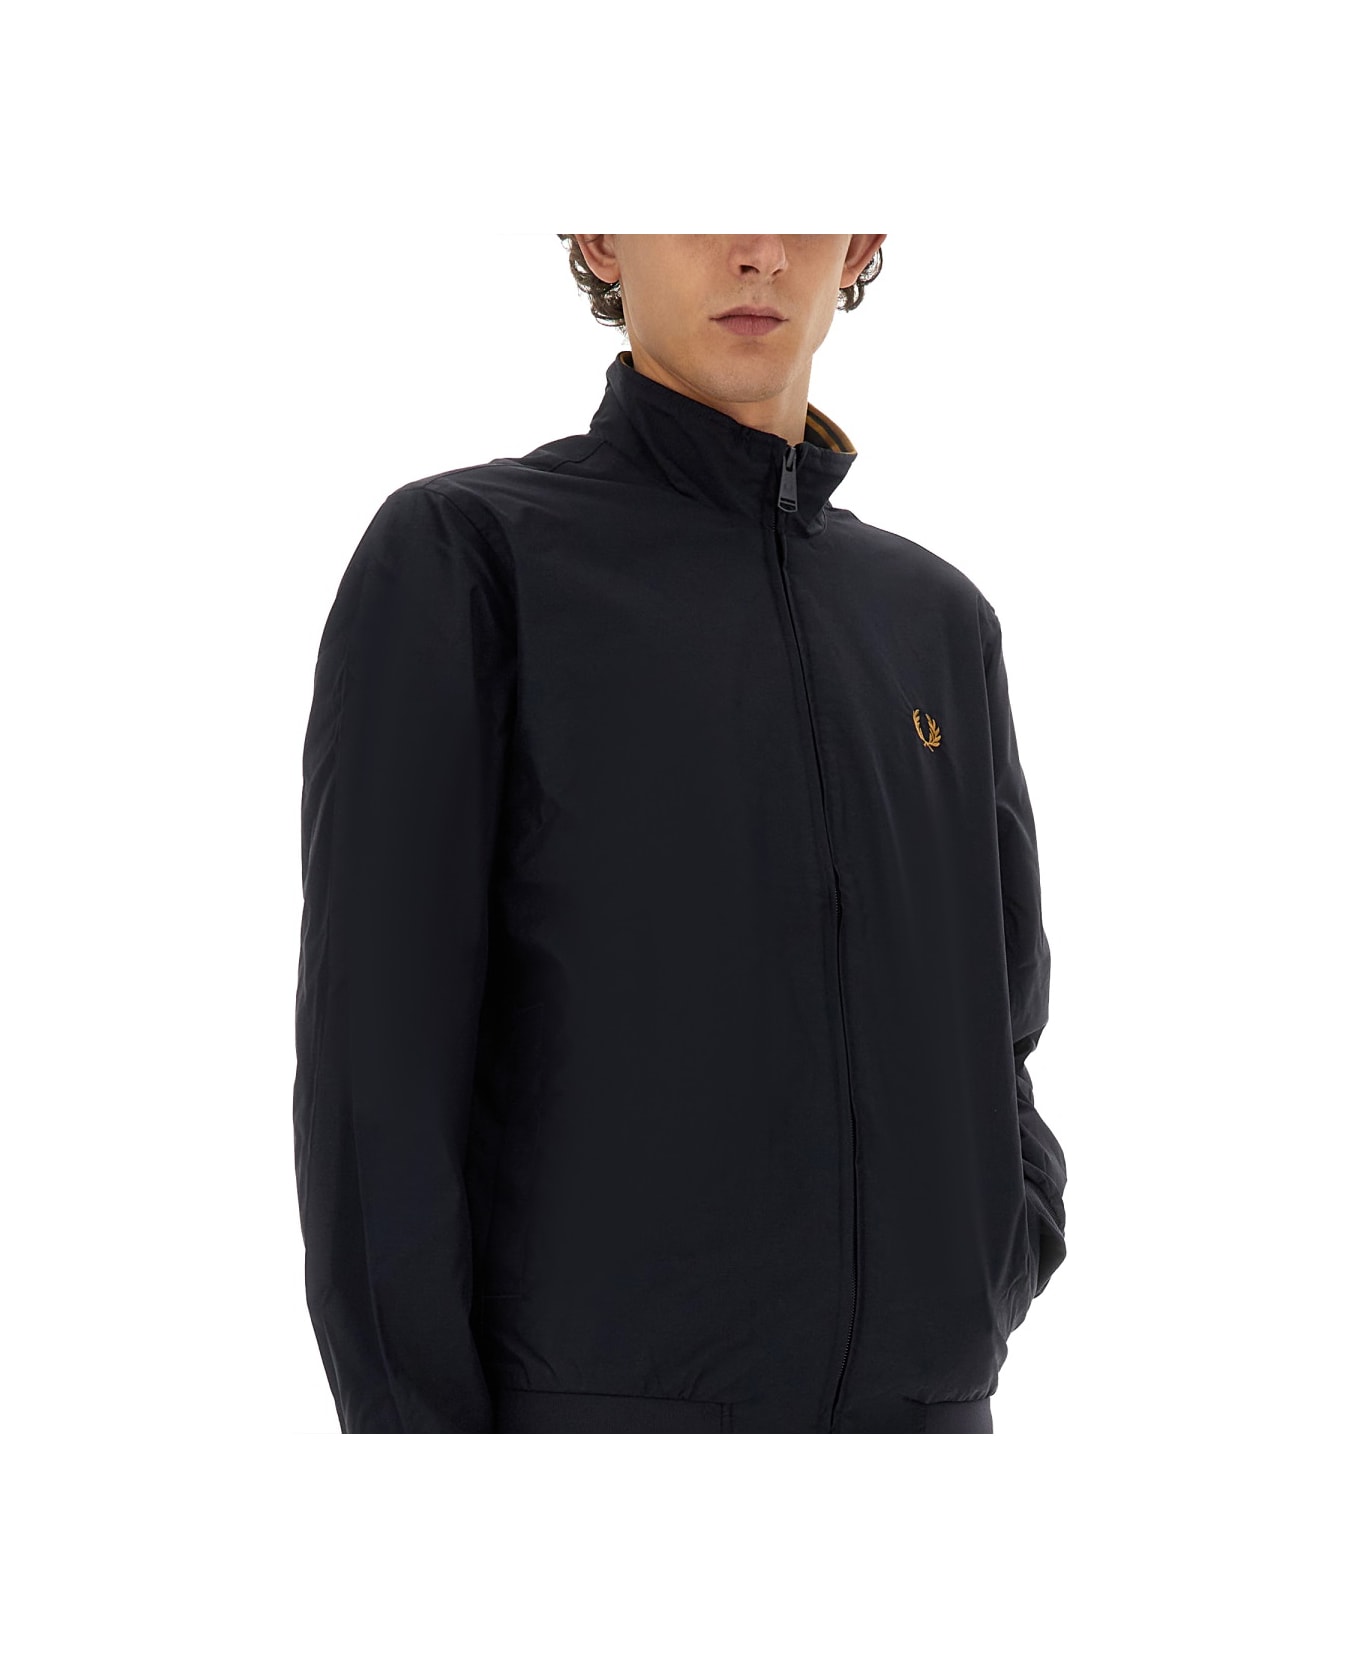 Fred Perry "brentham" Jacket - BLUE